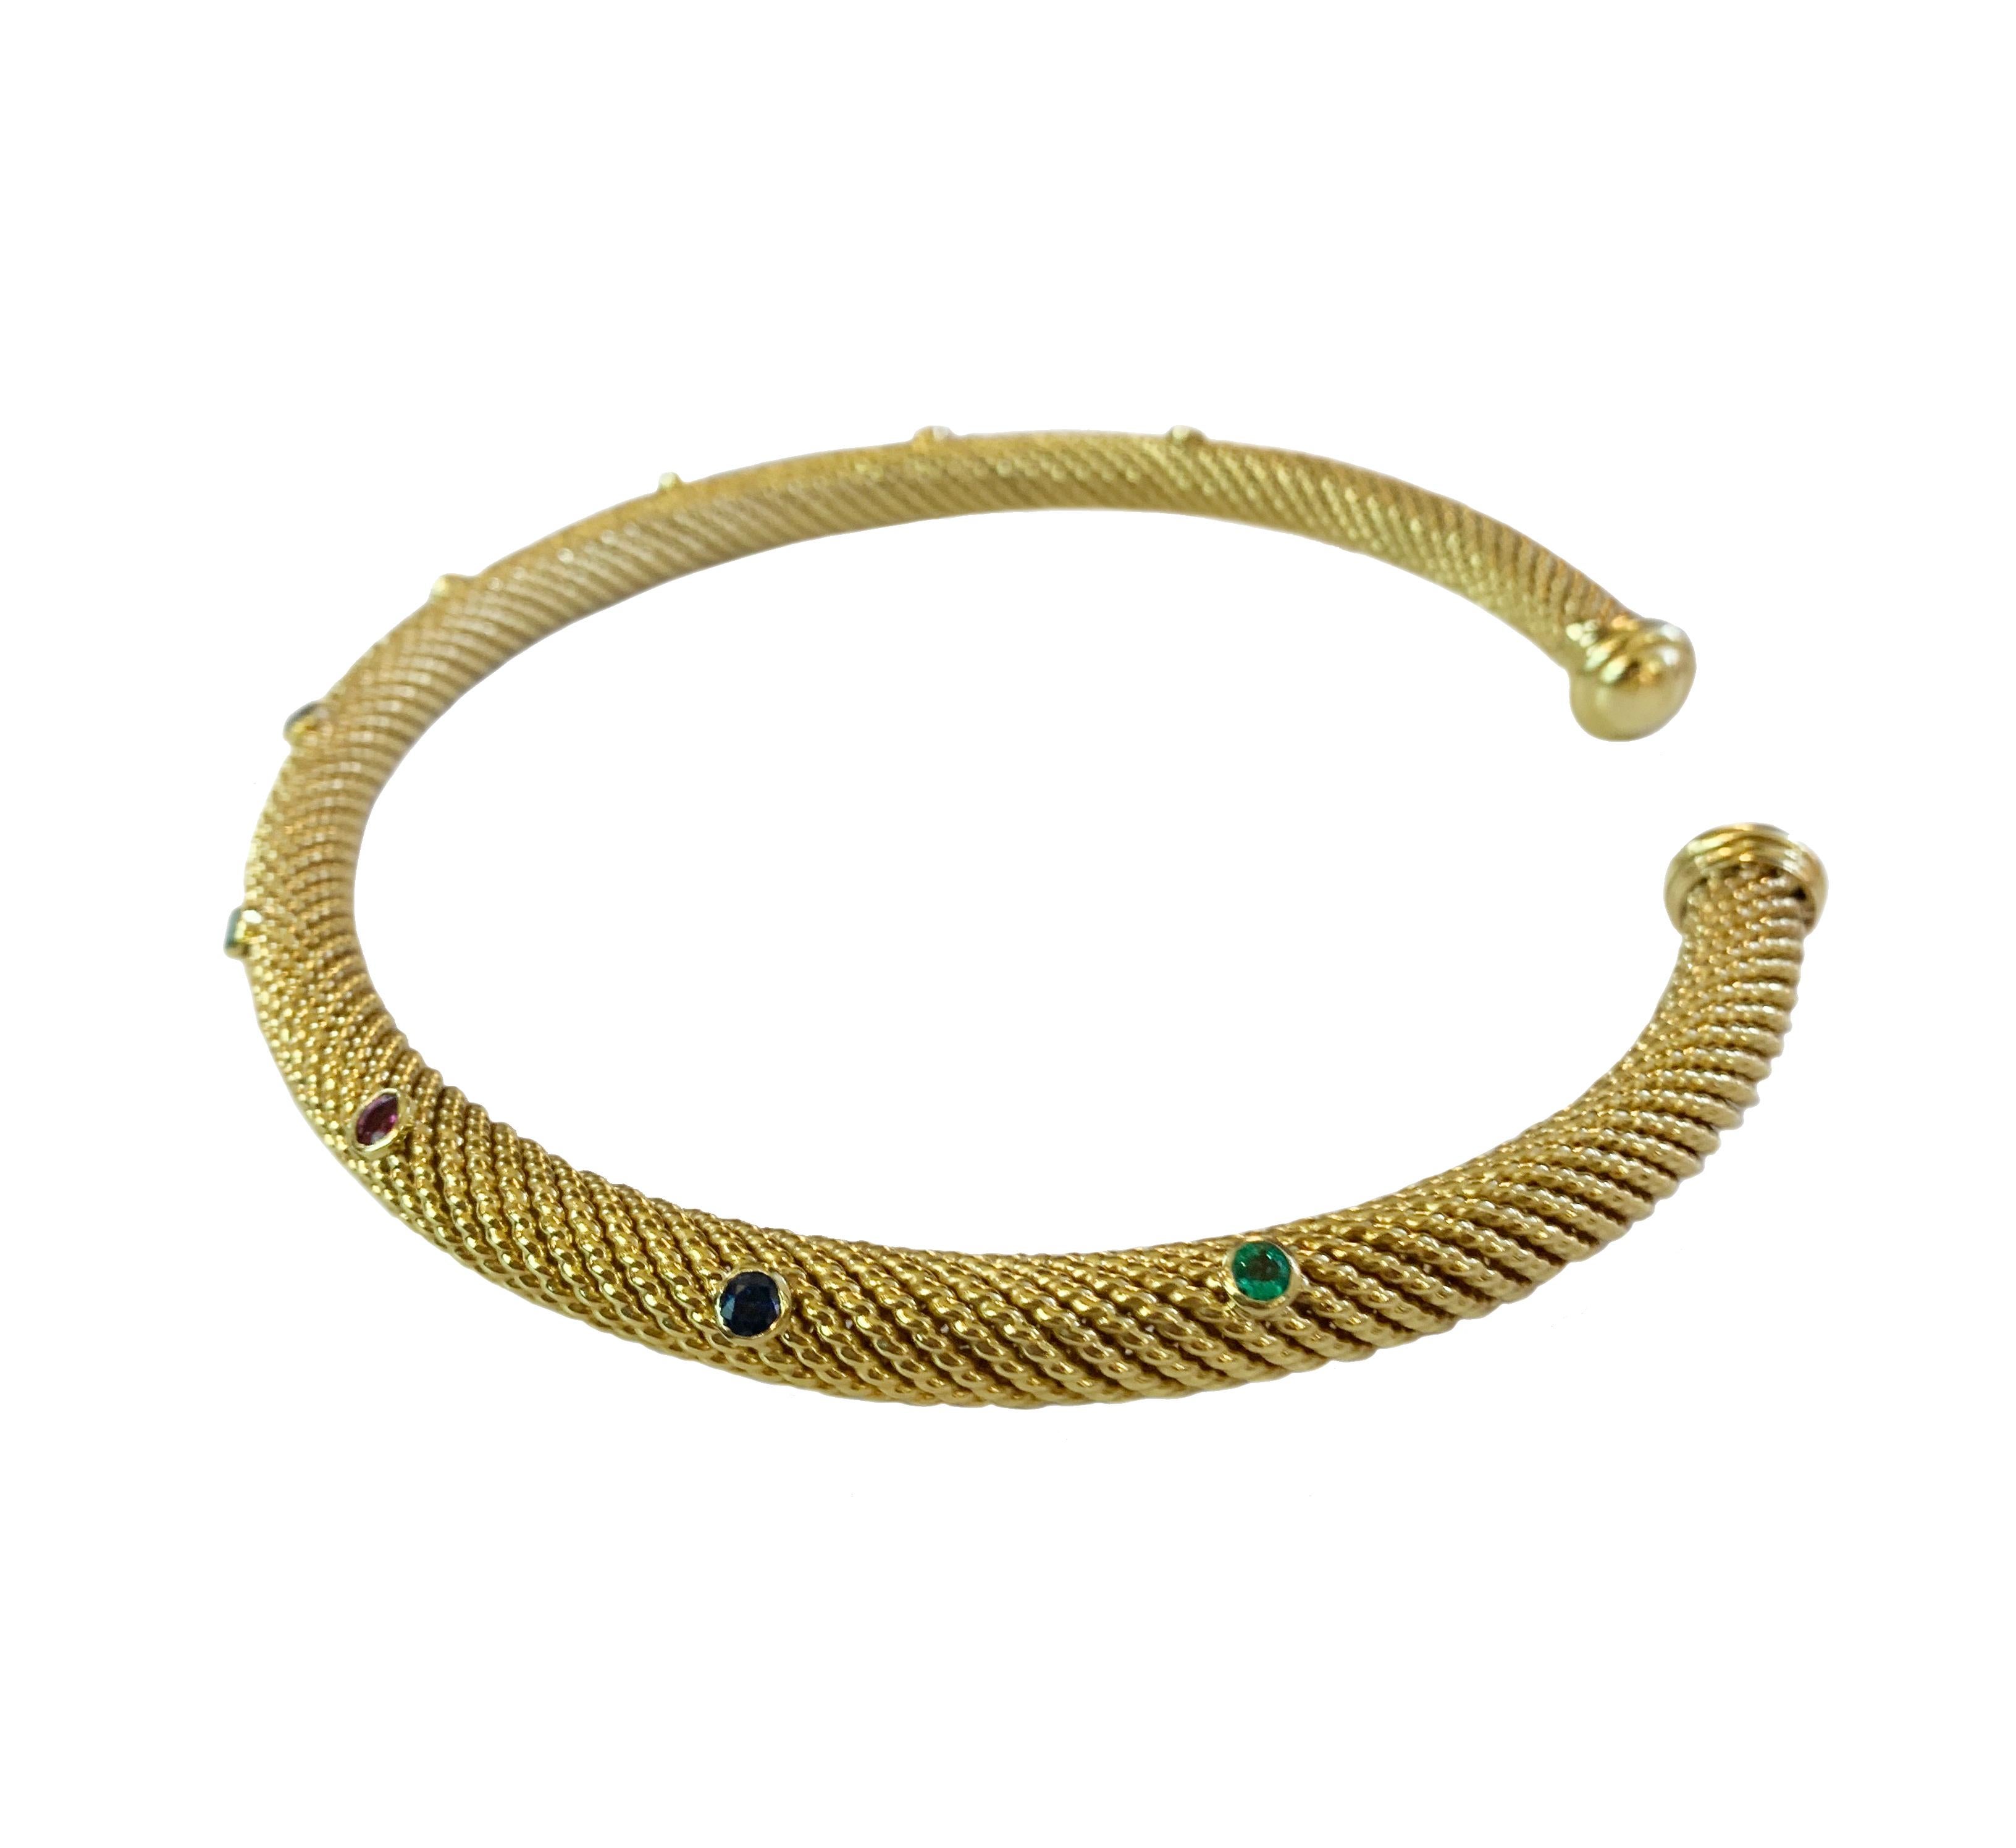 -Mint condition

-18k Yellow Gold

-Weight: 71.7gr

-Width: 9mm

-Stones: Emerald, Sapphire, Ruby

-Inner circumference: 15”

-Comes with Box

-Retail: $15000